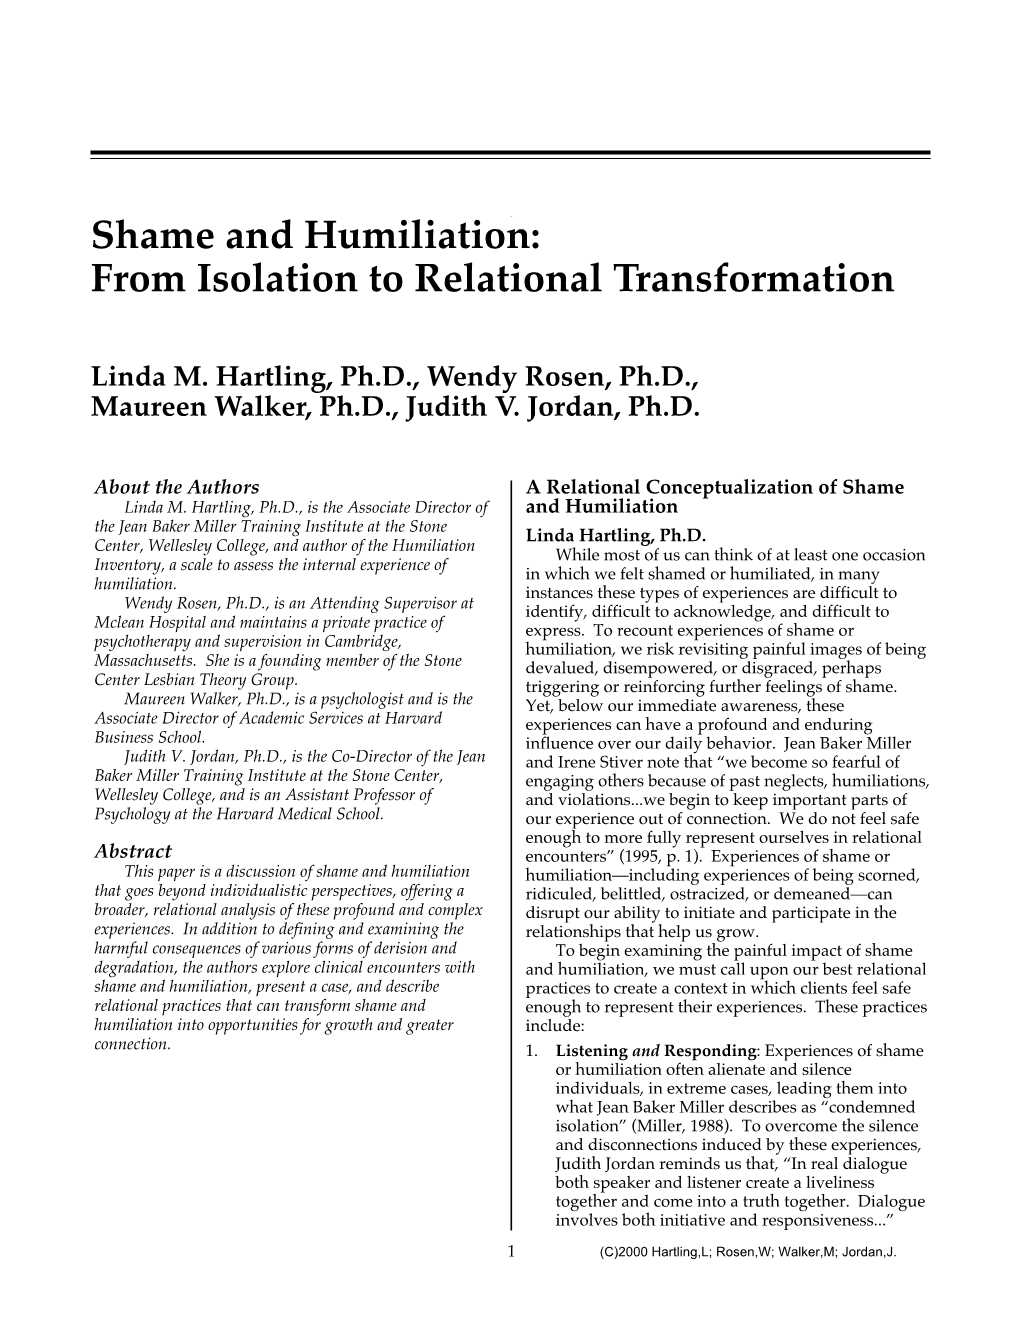 Shame and Humiliation: from Isolation to Relational Transformation